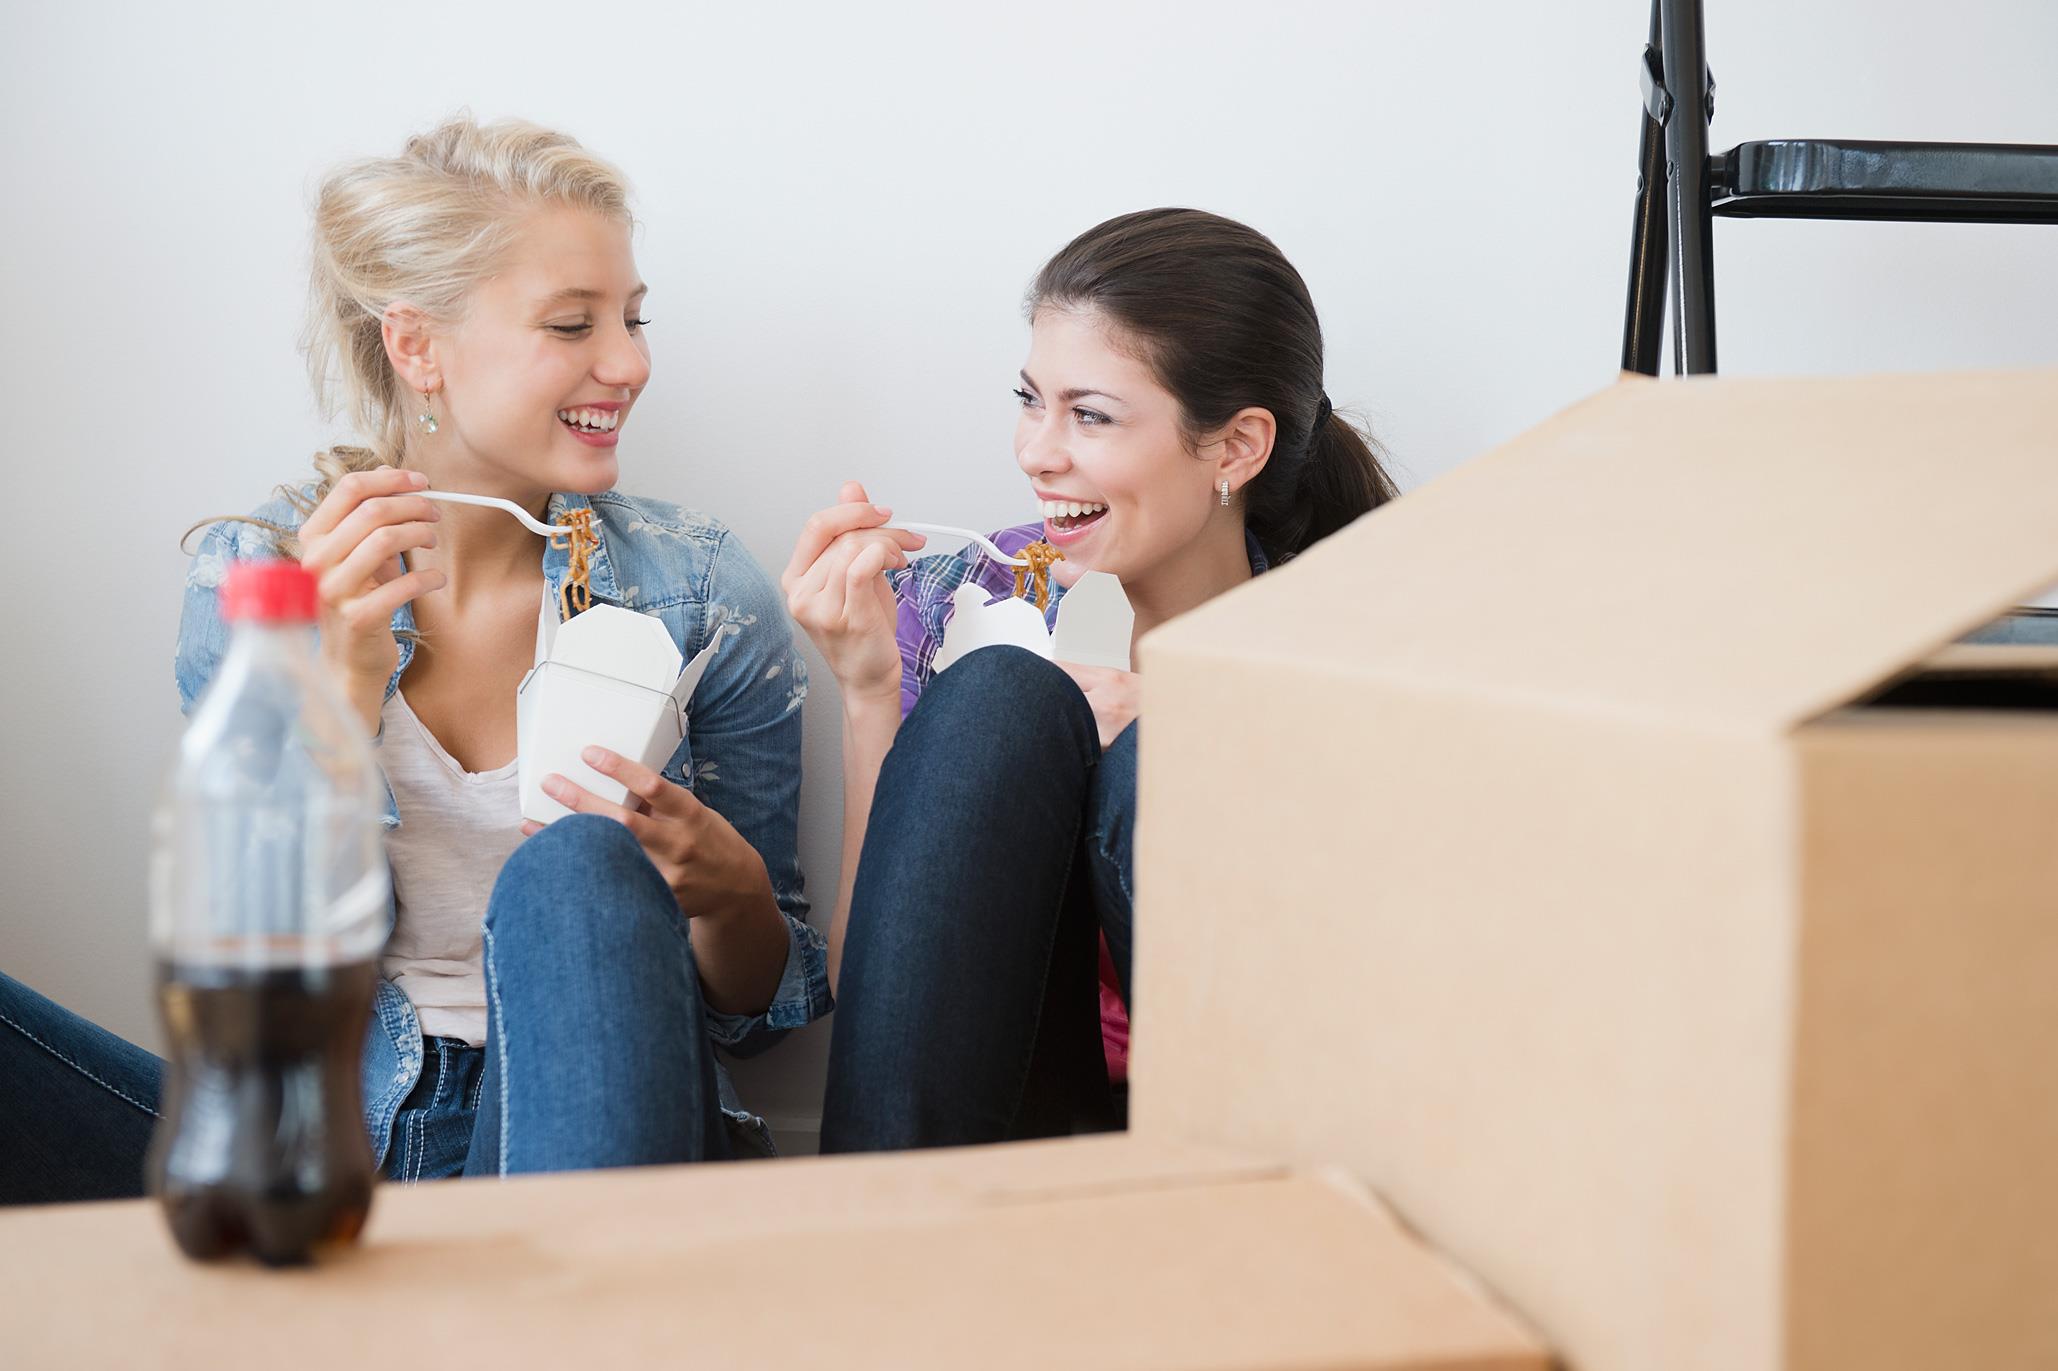 Top Things to Consider When Choosing a Roommate